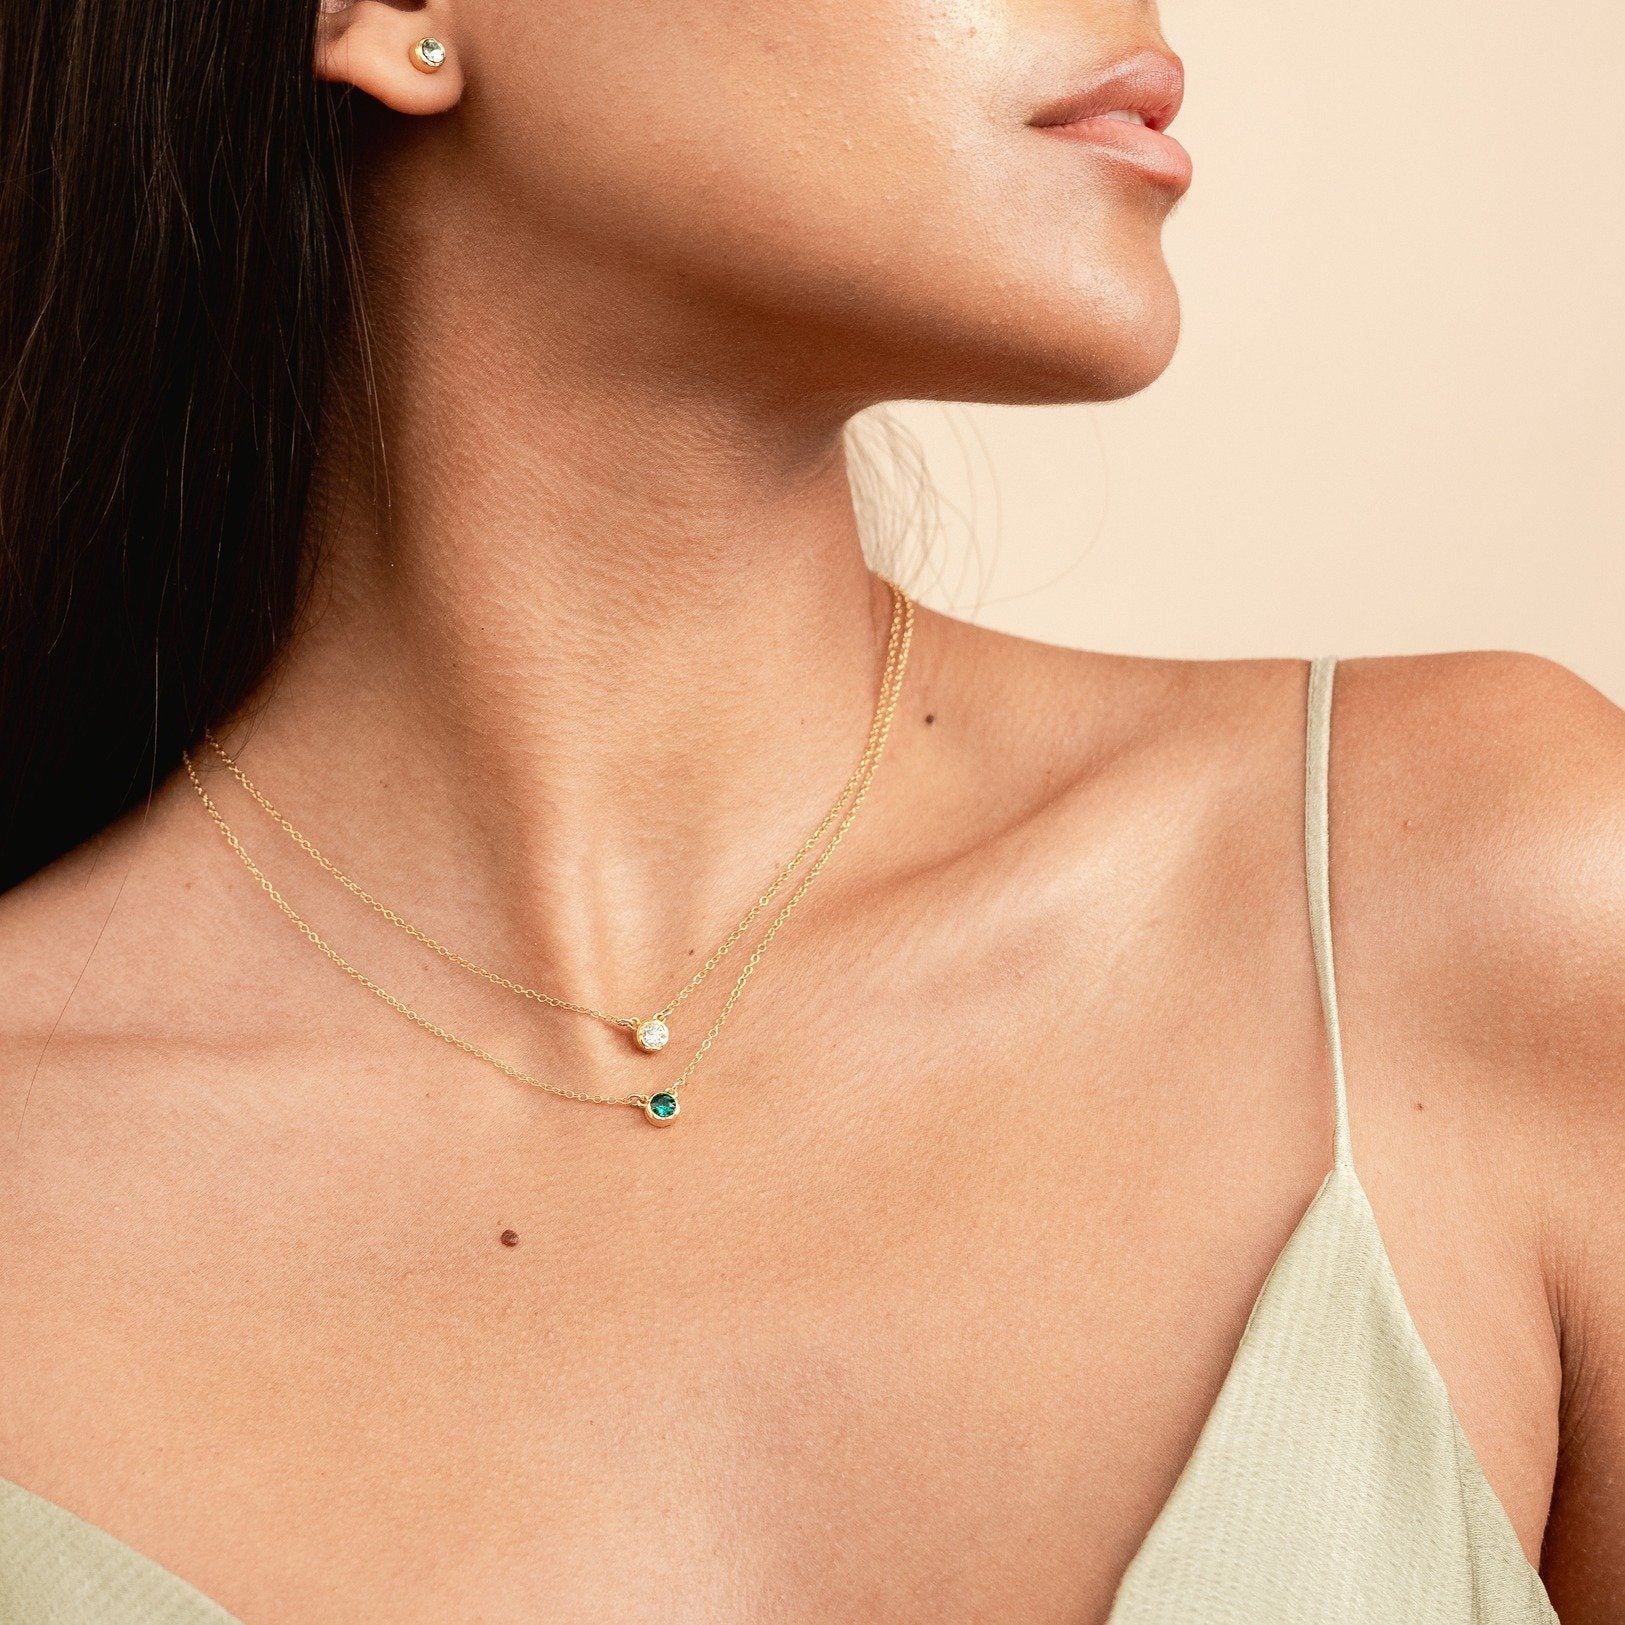 Model wearing the dainty gold birthstone necklaces in April (crystal) and May (emerald) and the August stud earrings made by Katie Dean Jewelry